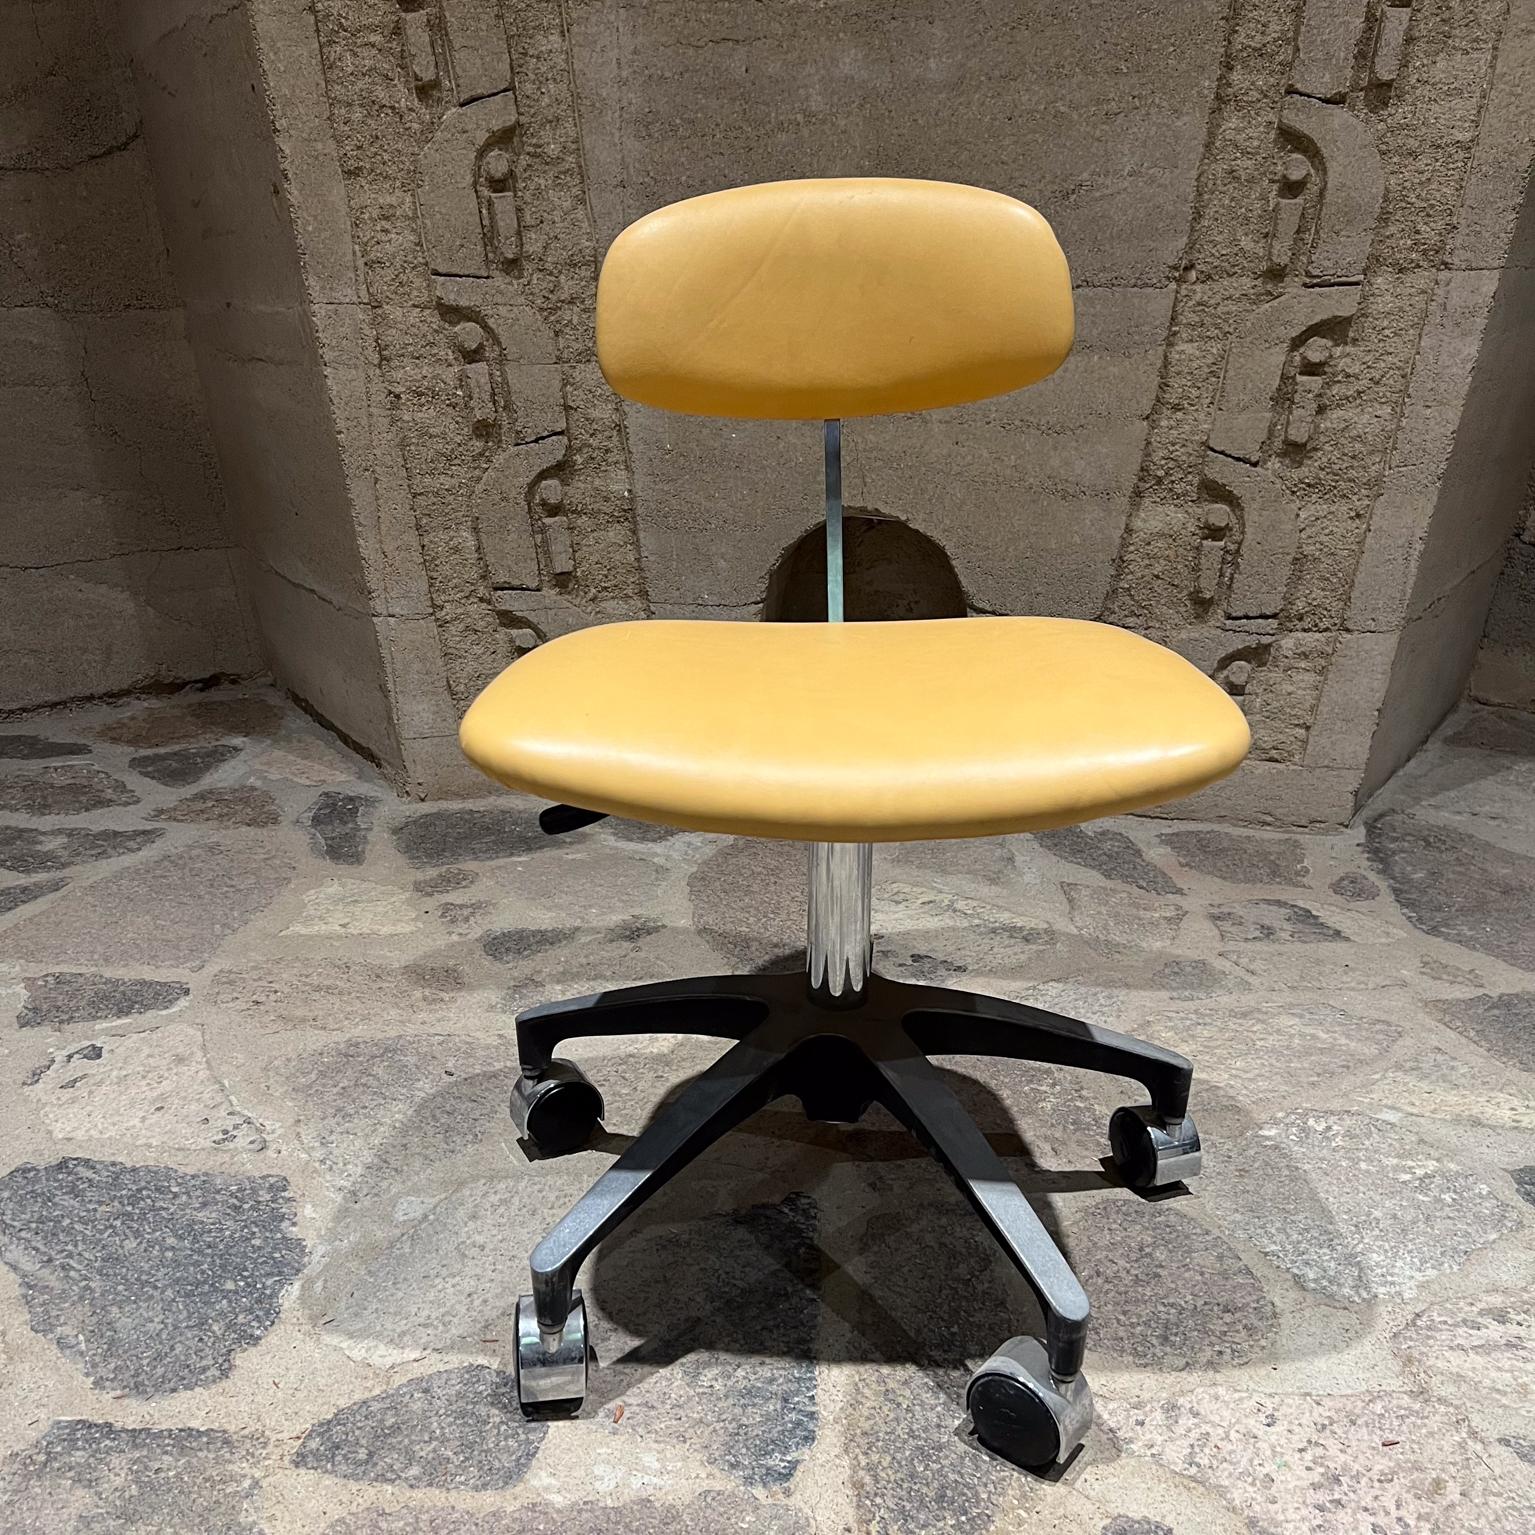 
1960s by EST industrial office leather task chair 
Grafton, WI
Stamped by maker
Aluminum with new leather upholstery.
Five-star wheel
Good quality construction with clean and modern lines.
Very comfortable!
29.5 h x 19.5 d x 18.5 w, seat adjustable